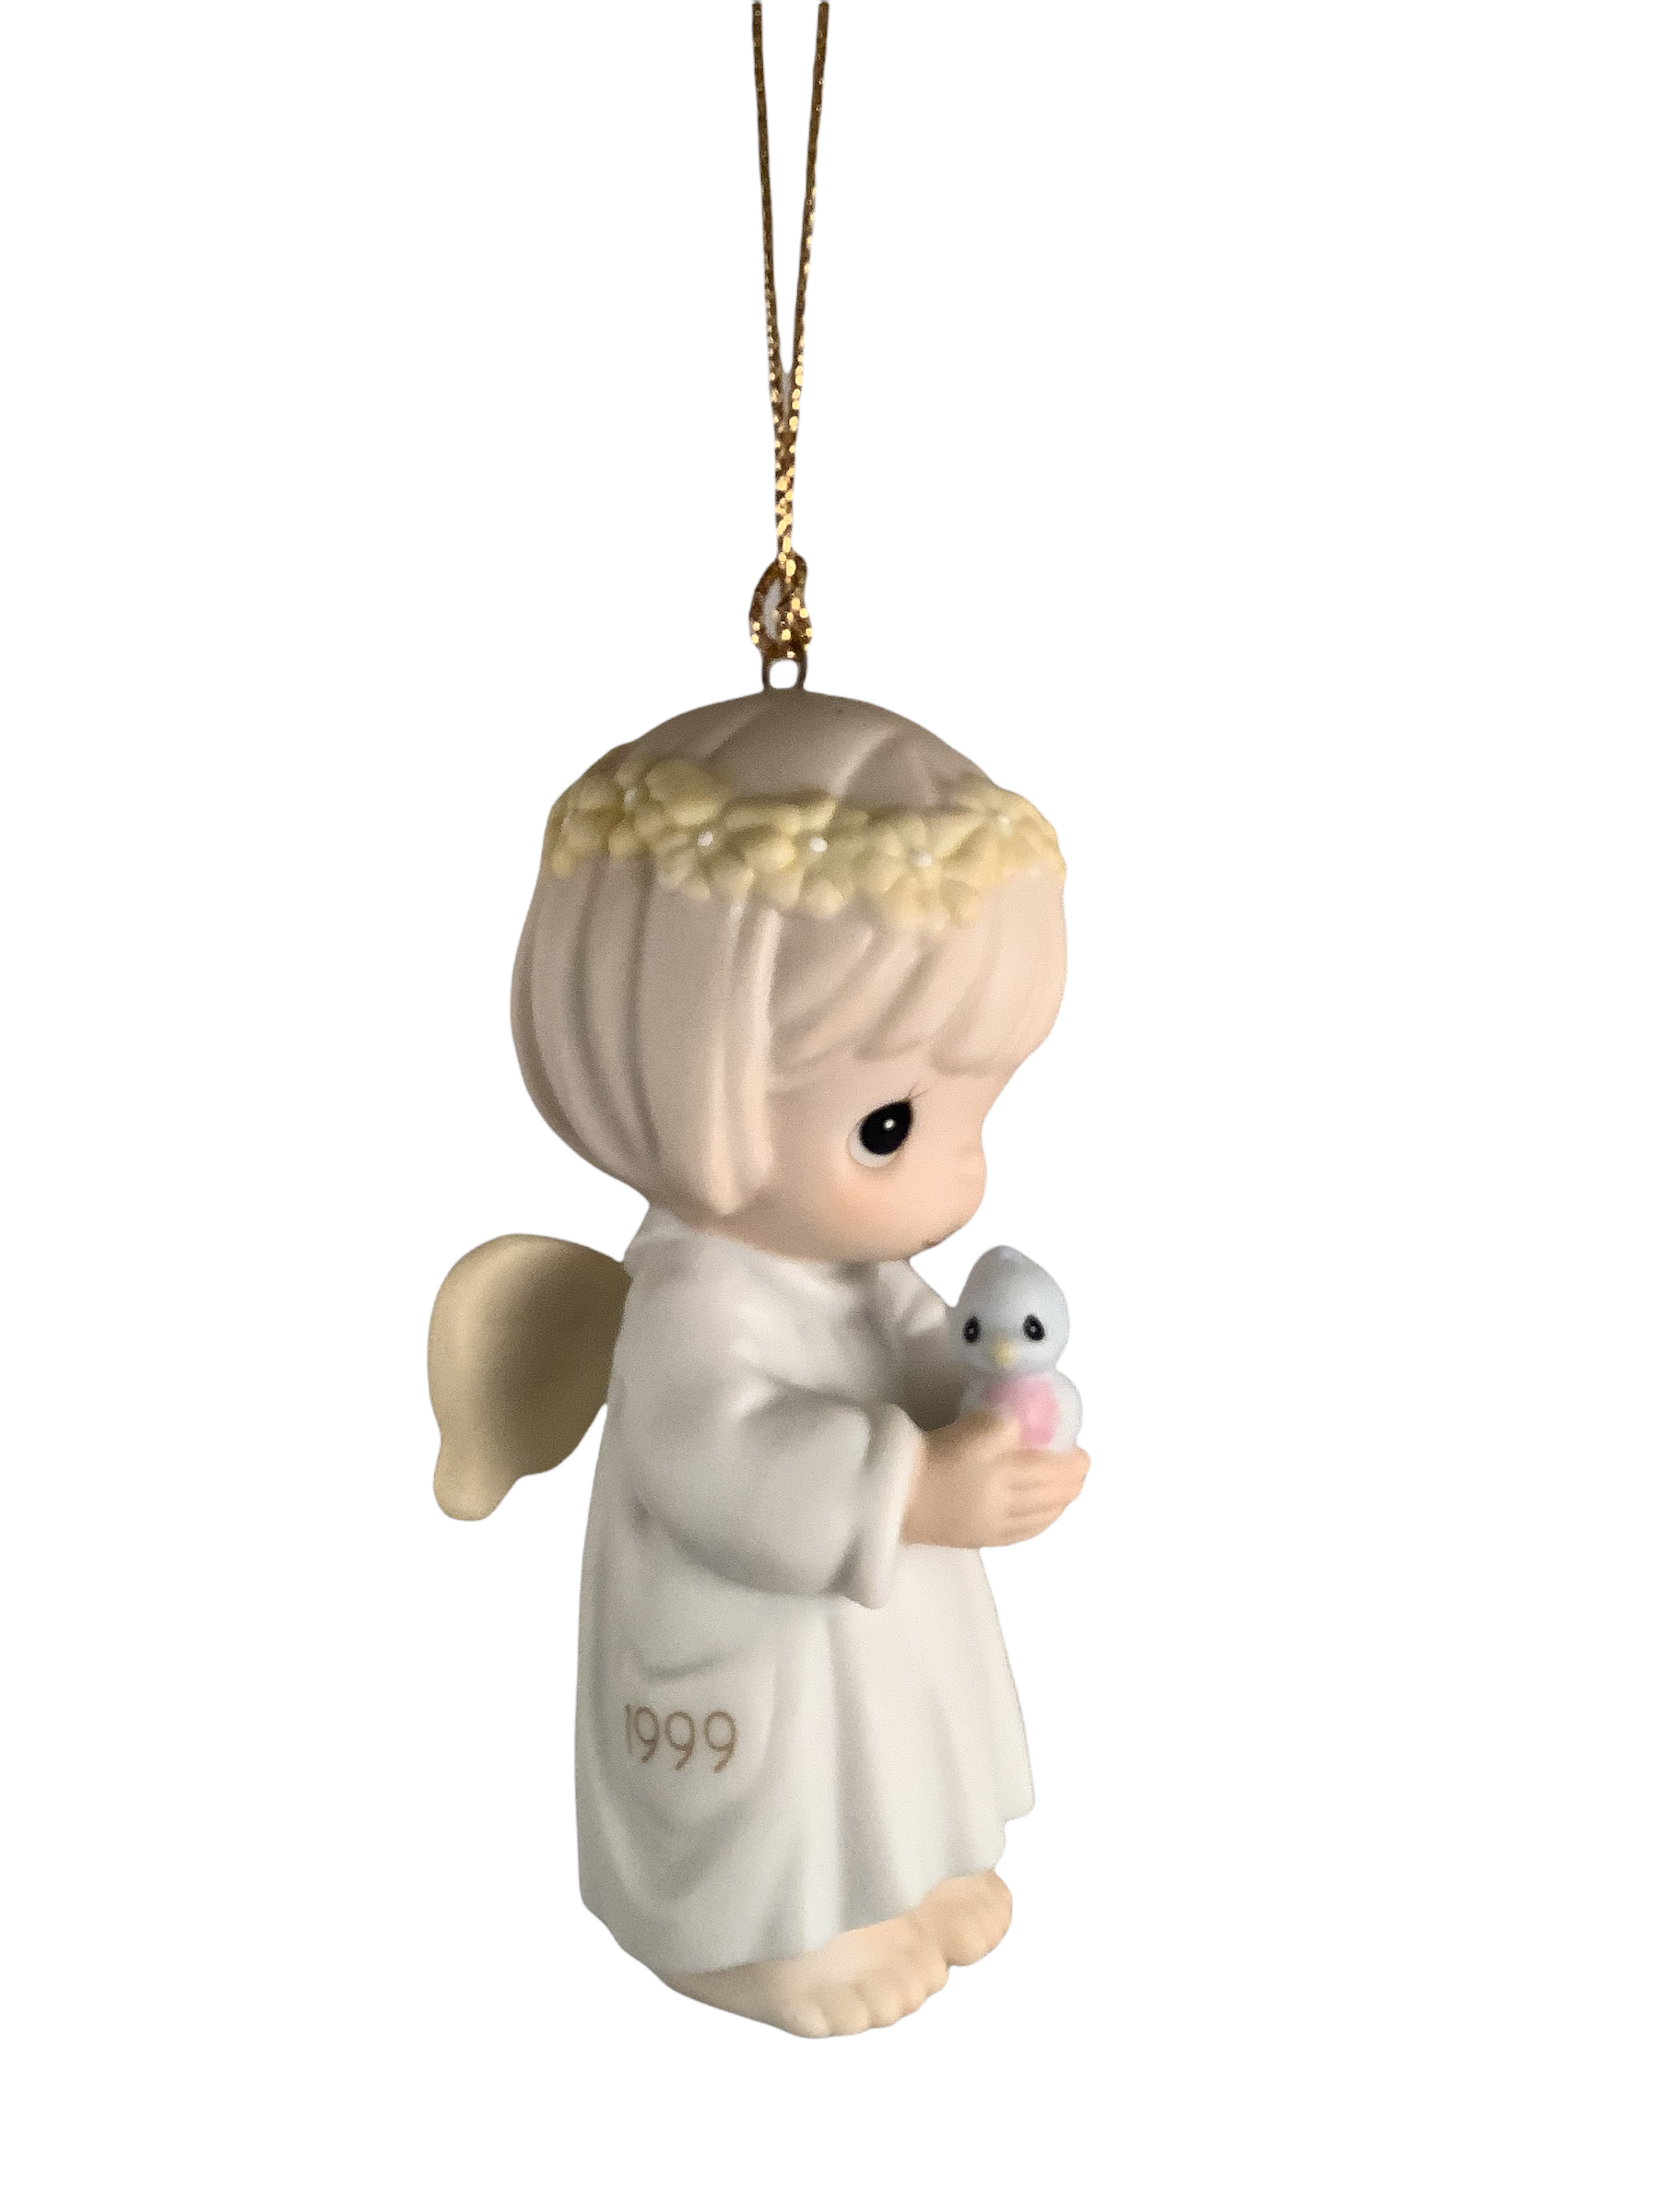 May Your Wishes For Peace Take Wing-  1999 Dated Precious Moment Ornament